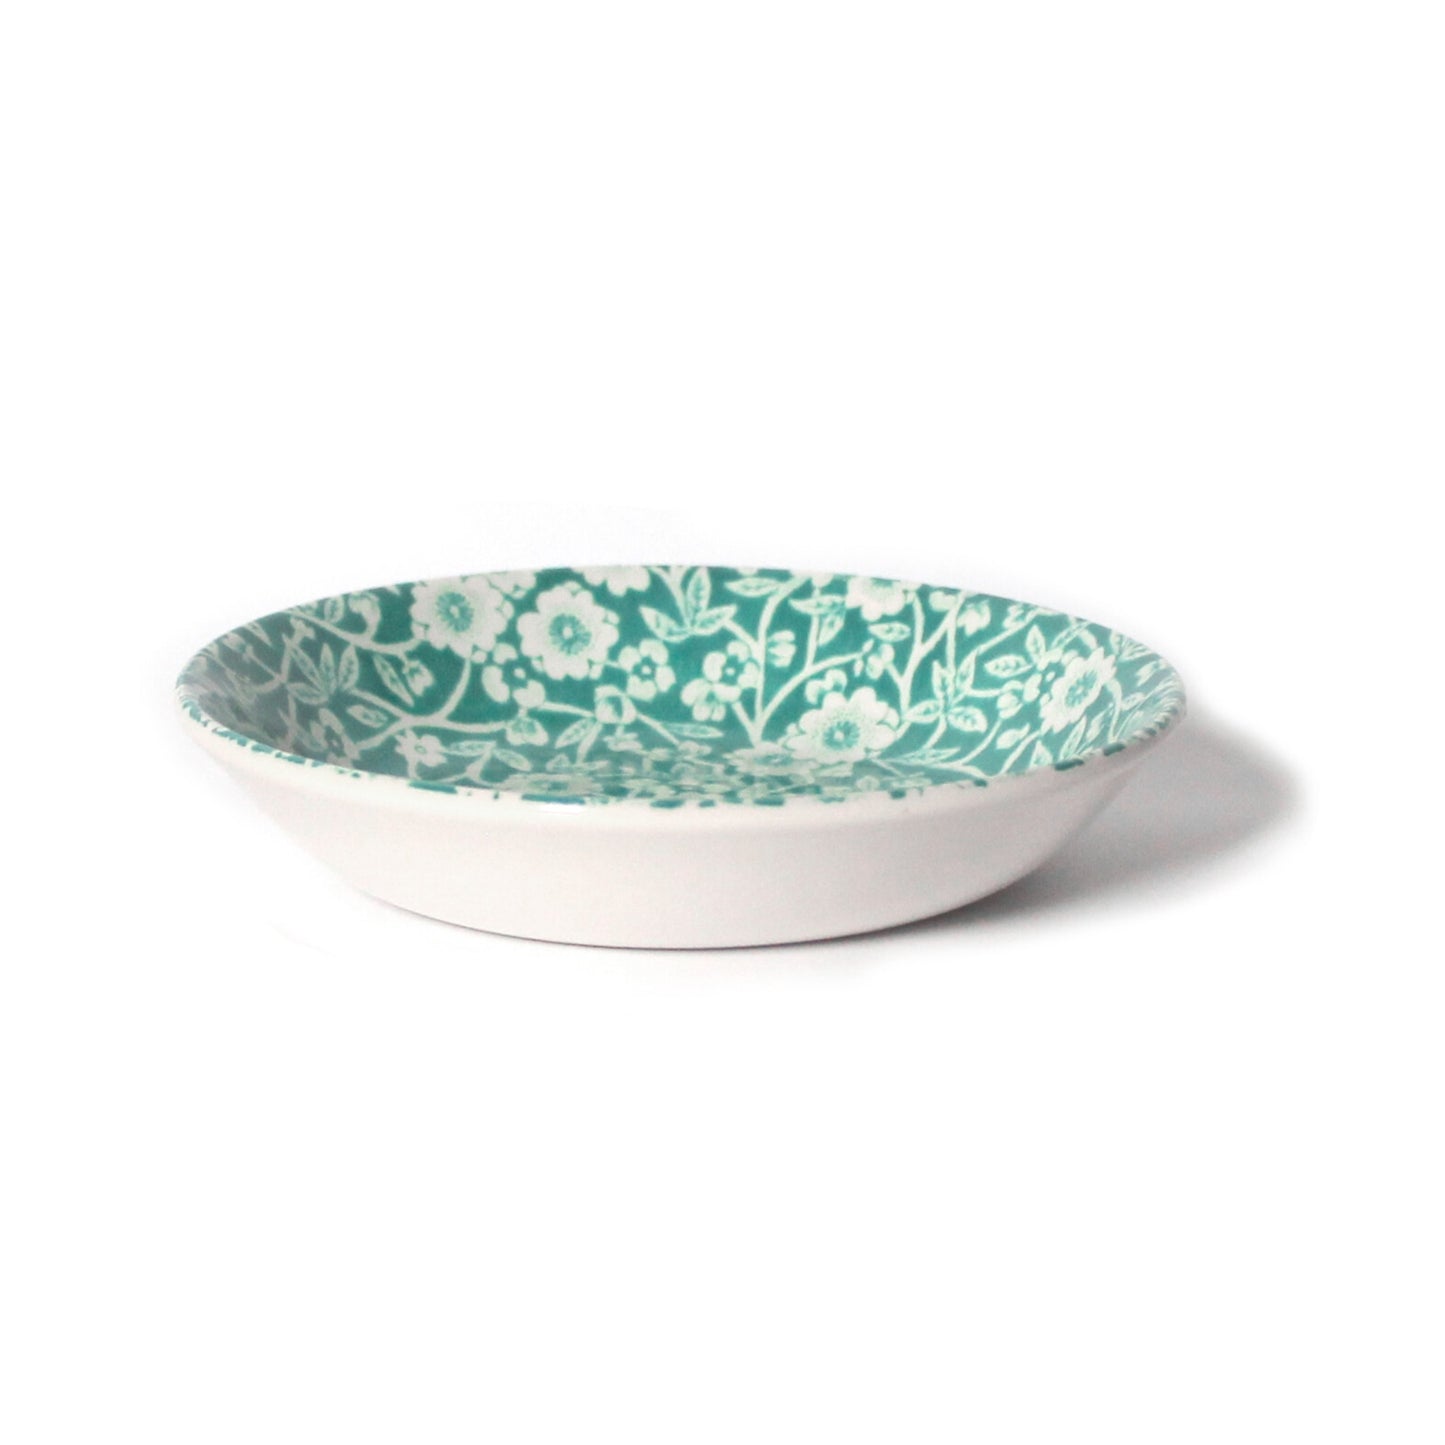 Teal Calico Butter Pat Dish 12cm/4.75" Seconds